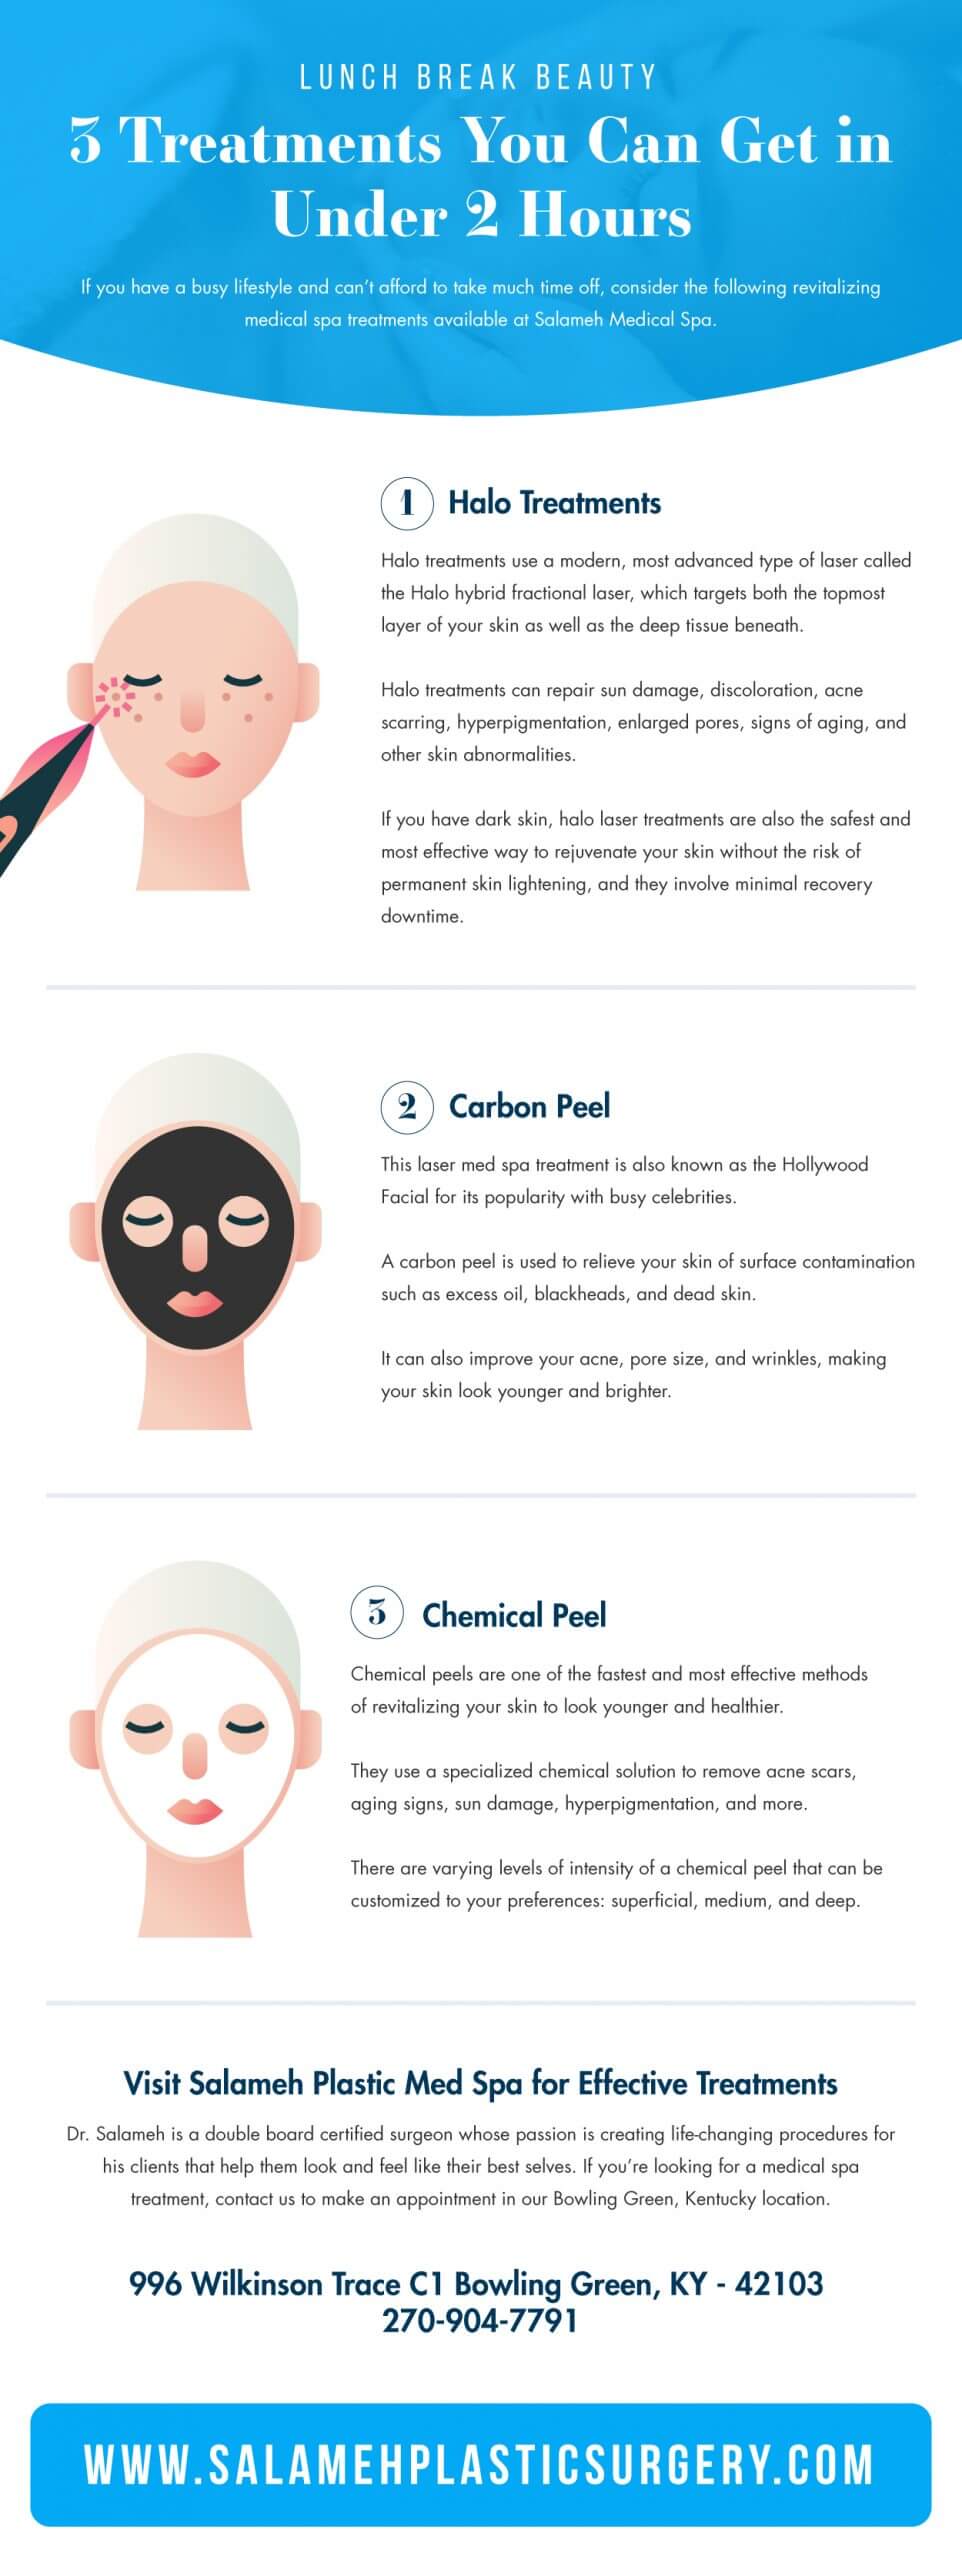 infographic featuring 3 lunch break beauty treatments